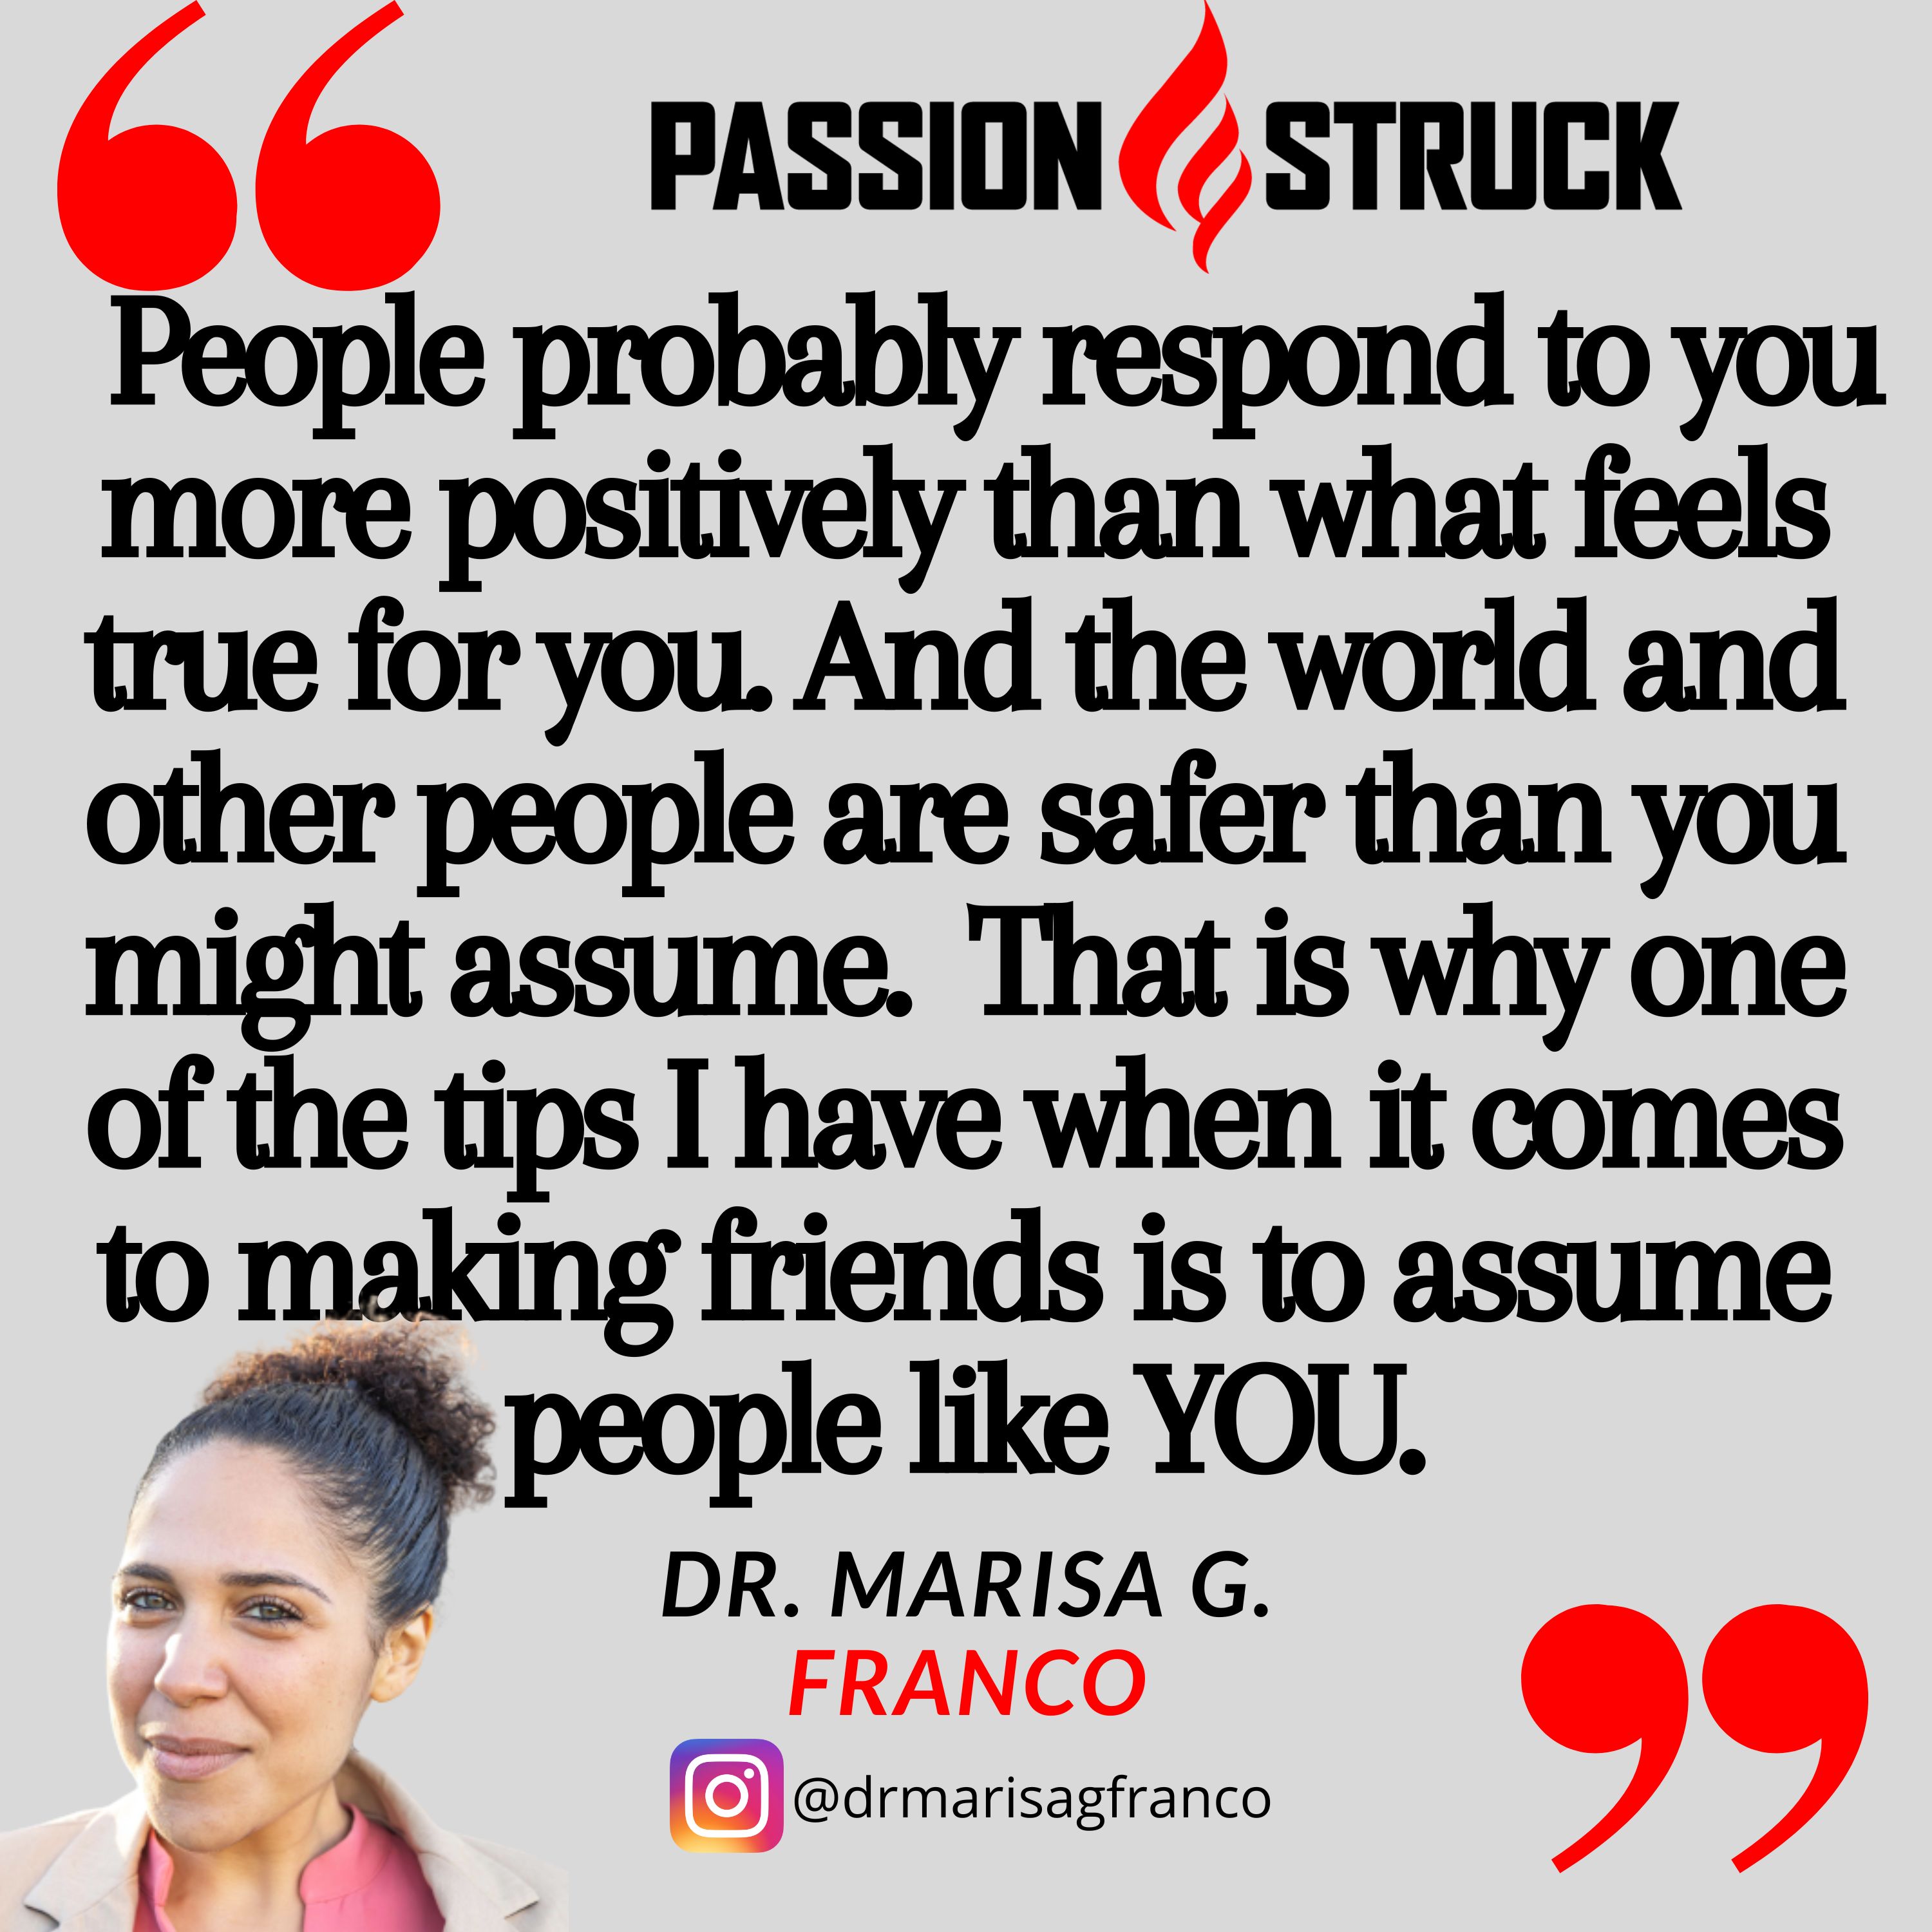 Marisa G. Franco quote from Passion Struck podcast: People probably respond to you more positively than what feels true for you. And the world and other people are safer than you might assume.  That is why one of the tips I have when it comes to making friends is to assume people like YOU.